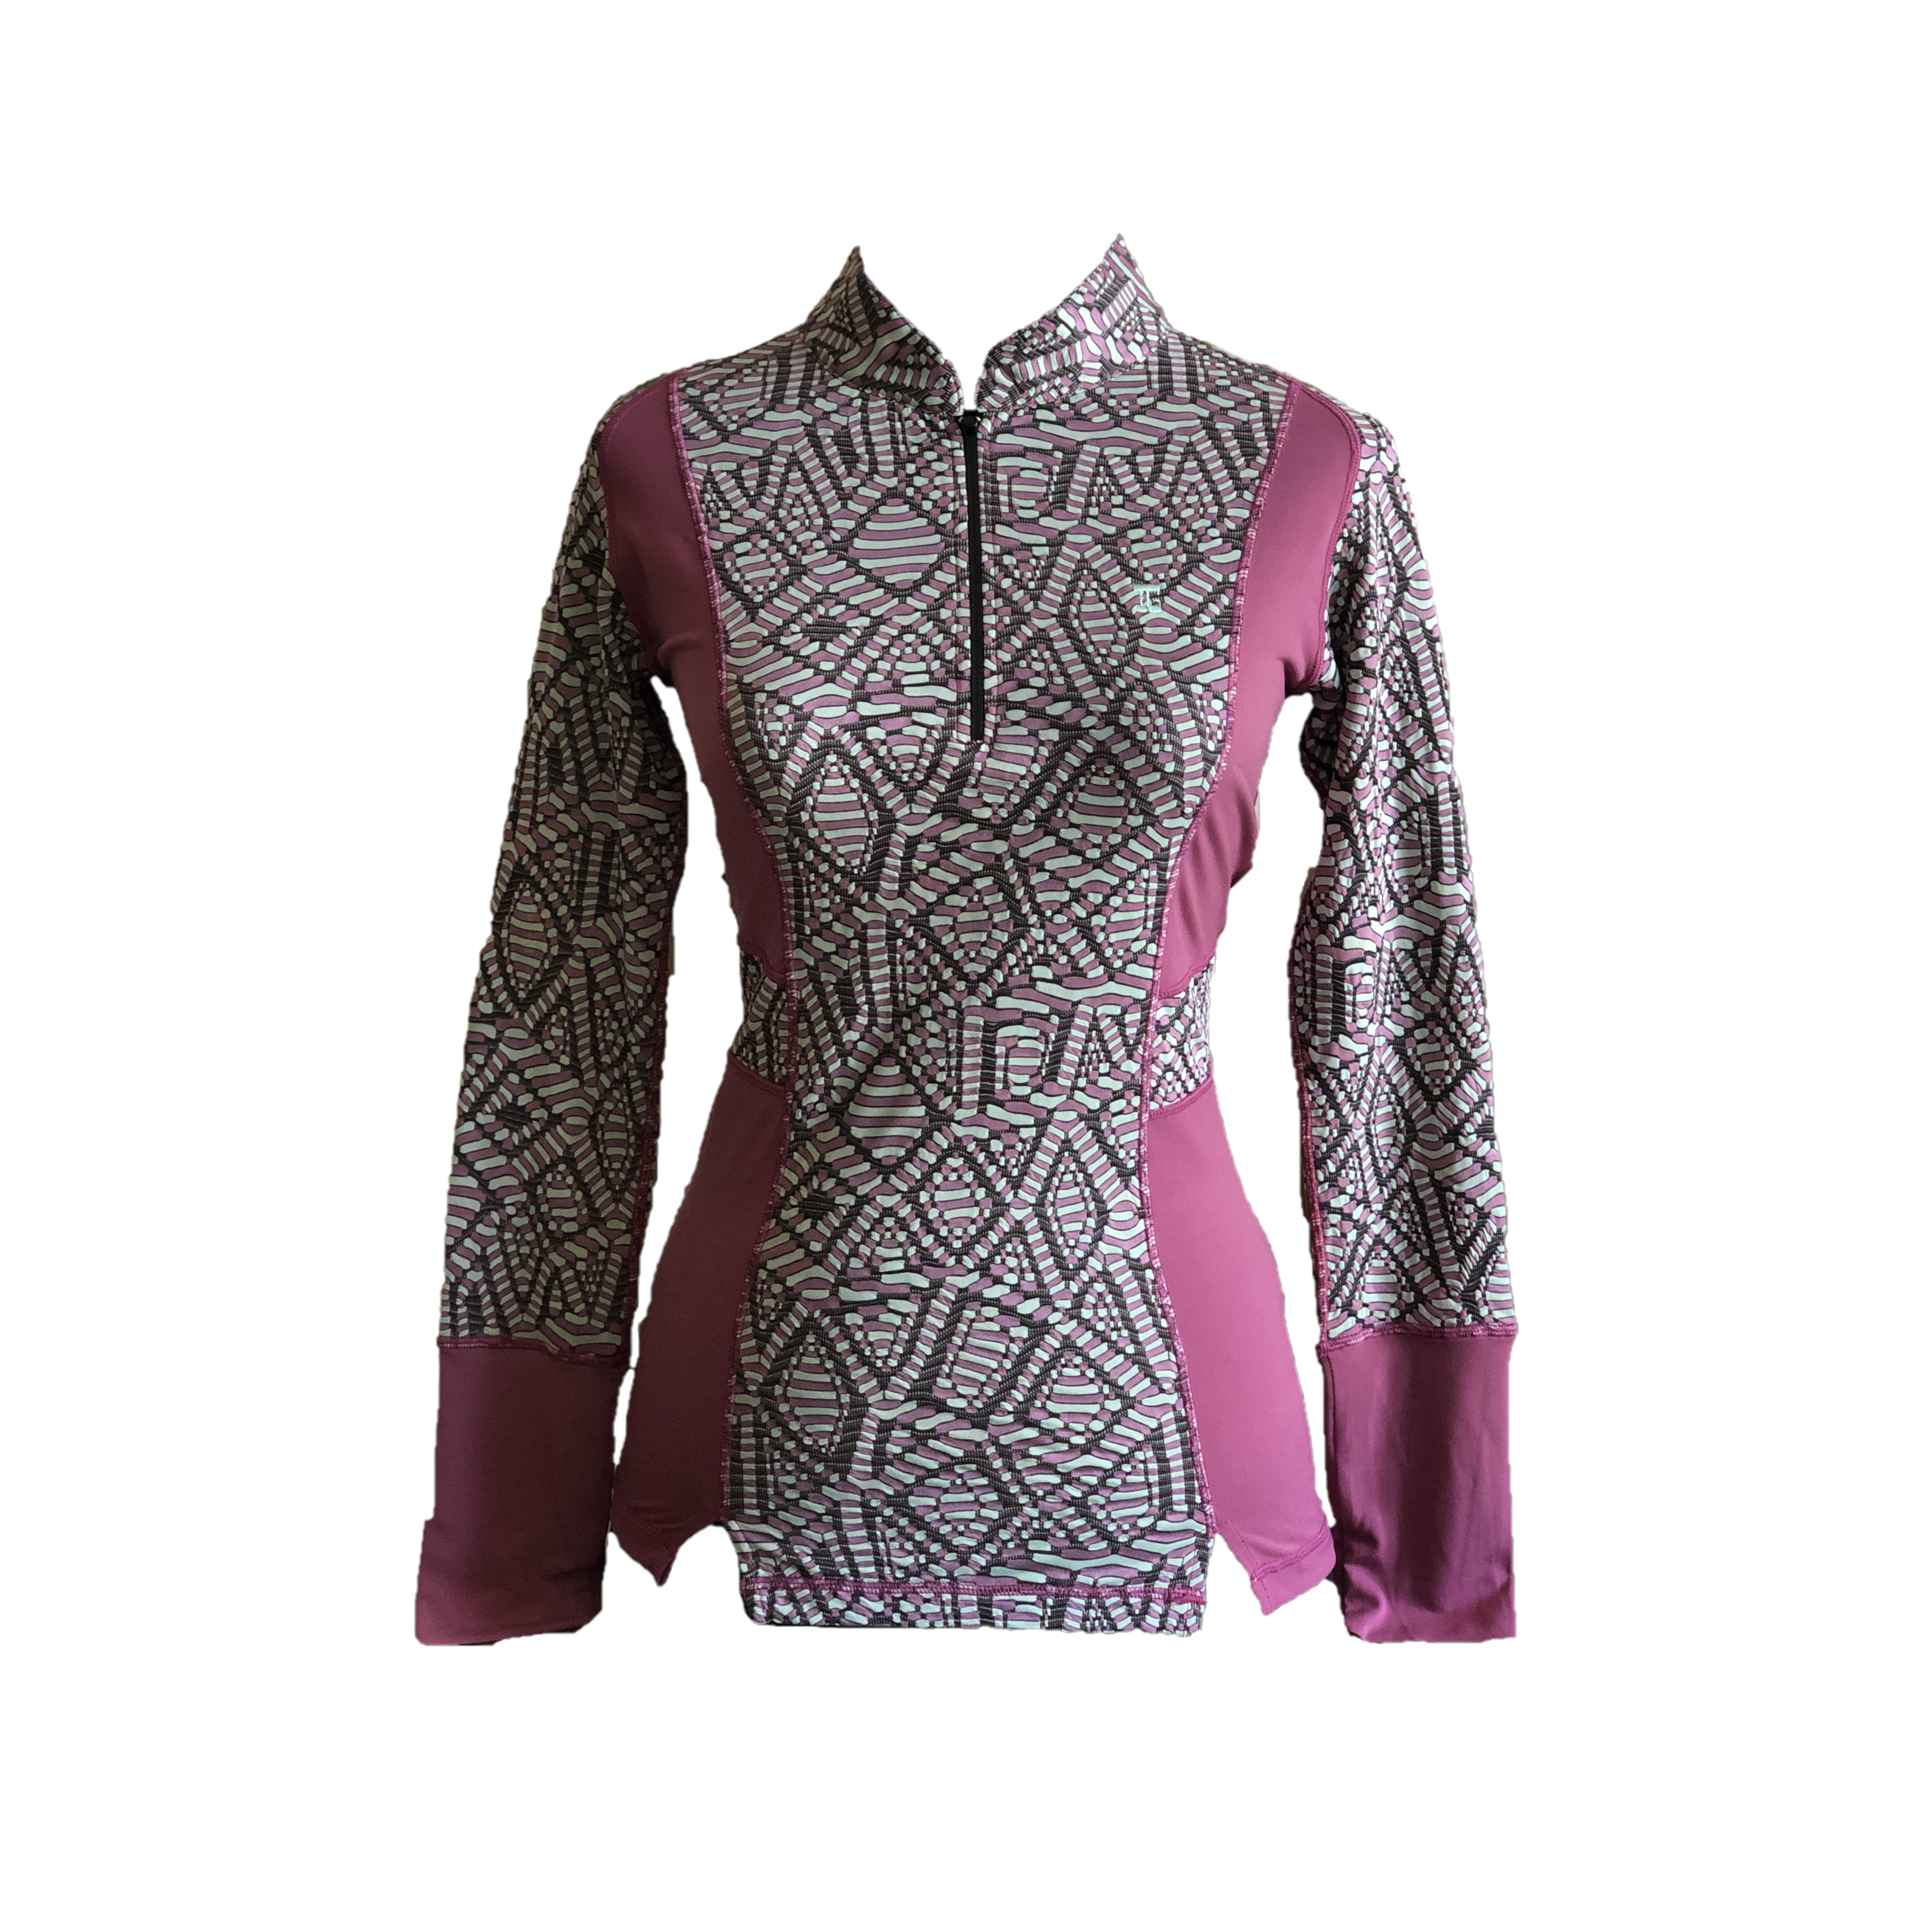 LT-112A || Ladies Top Long Sleeve Light Green And Modern Batik With Mauve Half Belted Waist Cuffs Under Arm Side Panels Zippered Mandarin type collar With Peaked Back Section